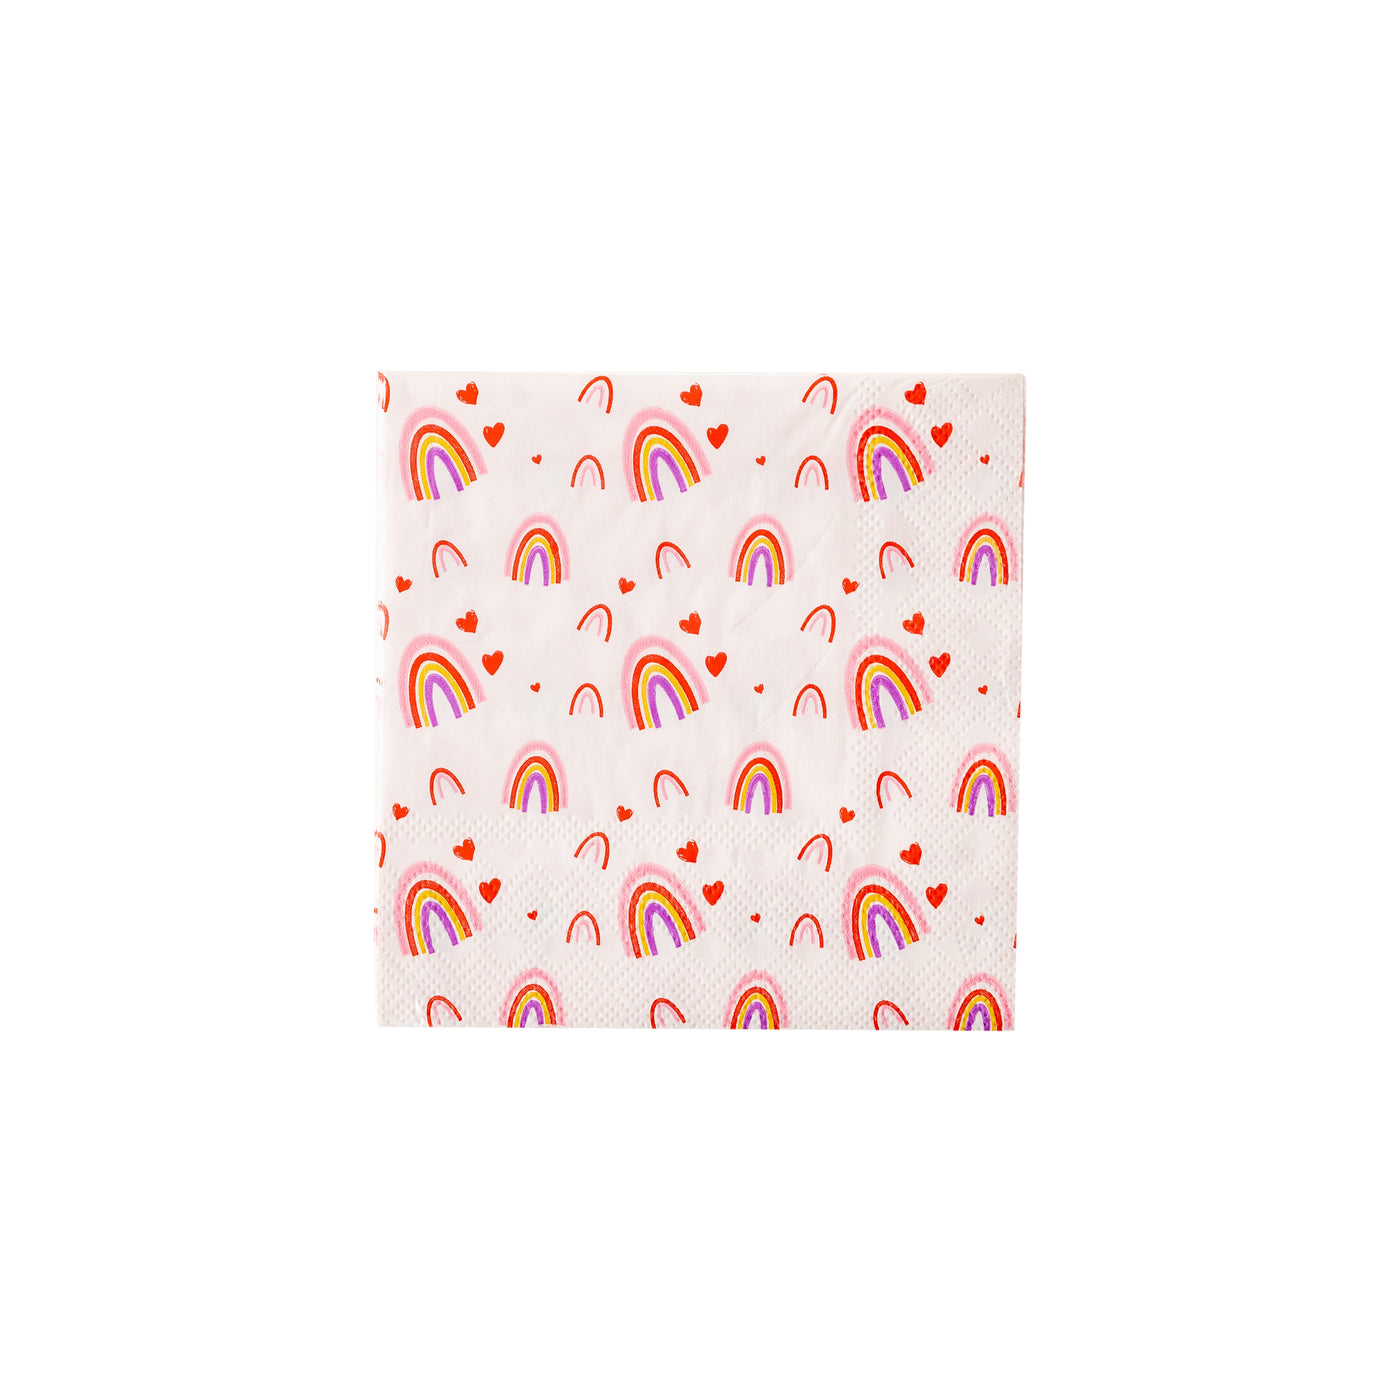 PLTS355C - Rainbows and Hearts Cocktail Napkin